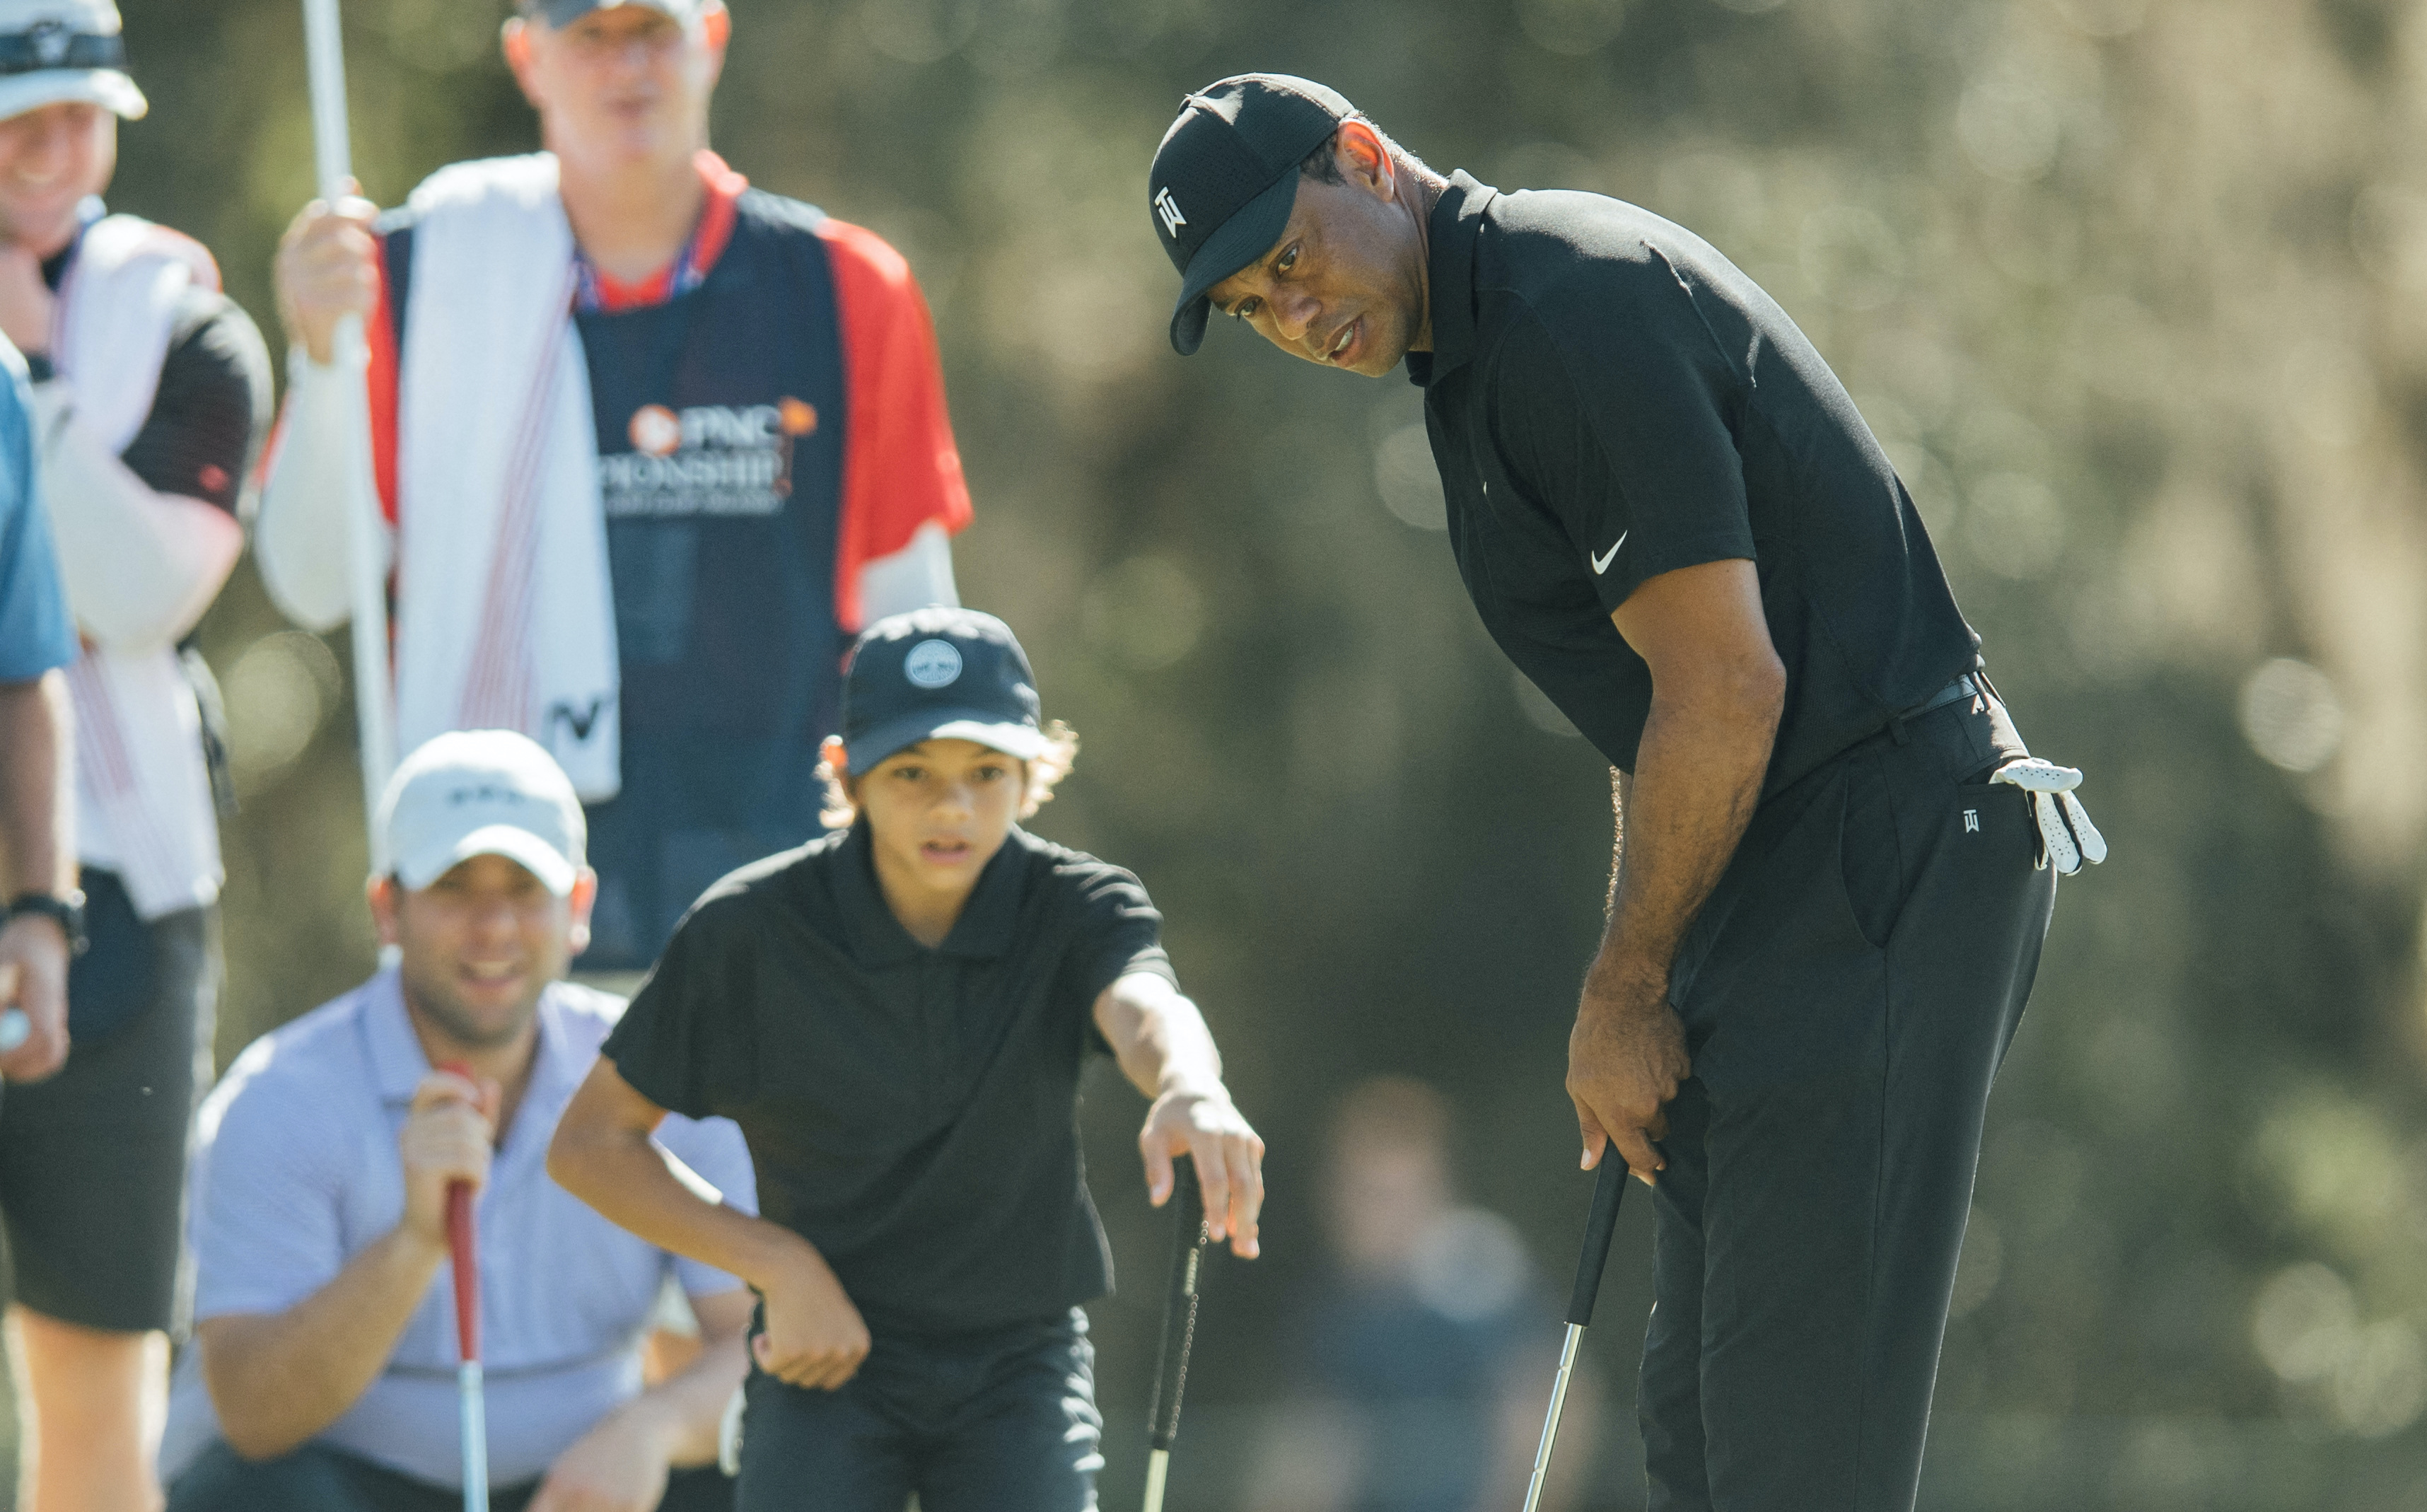 EXHAUSTED Tiger Woods watches son Charlie on driving range after Pro-Am round GolfMagic